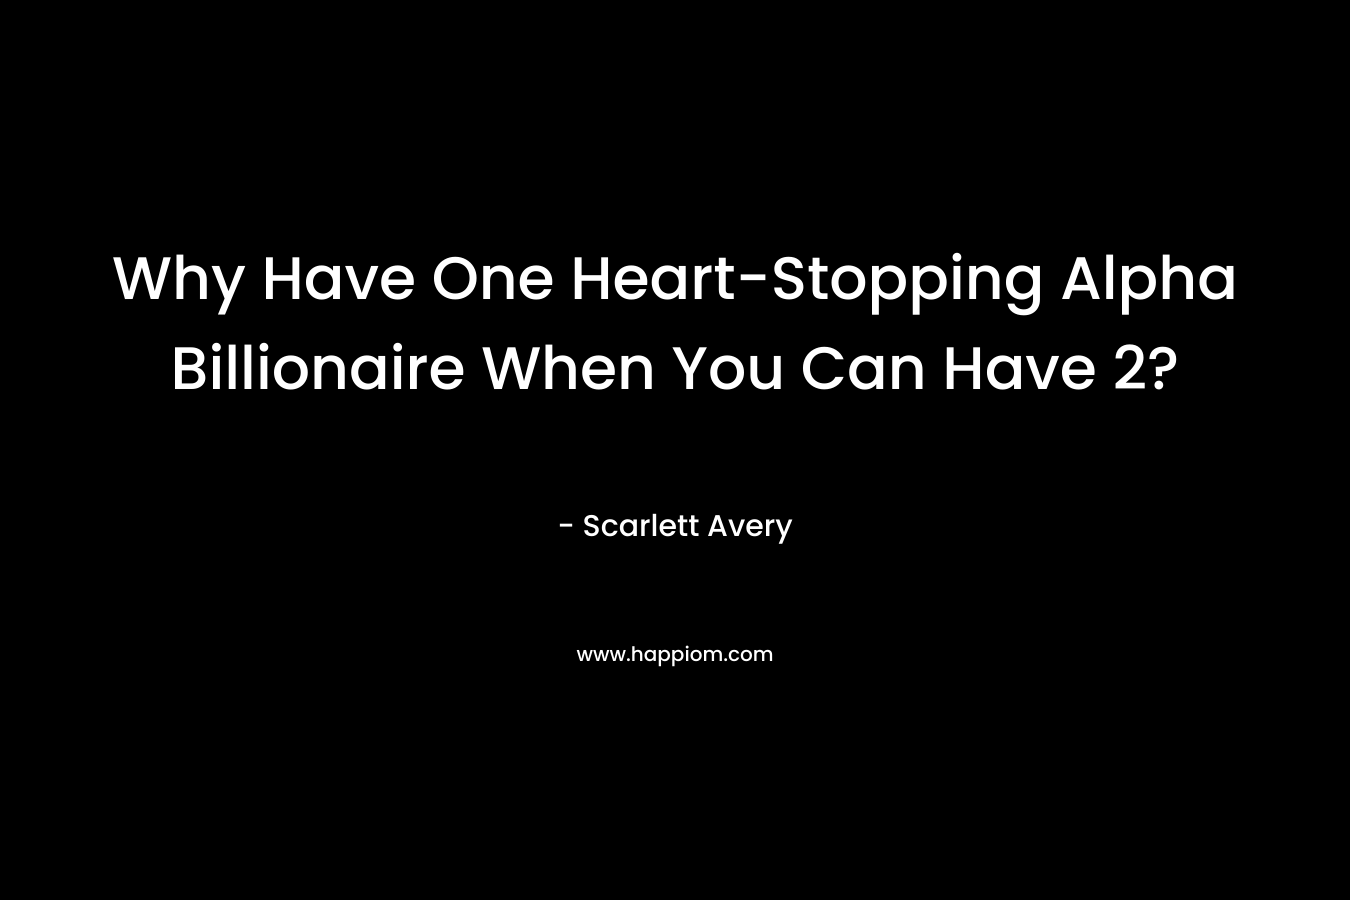 Why Have One Heart-Stopping Alpha Billionaire When You Can Have 2? – Scarlett Avery